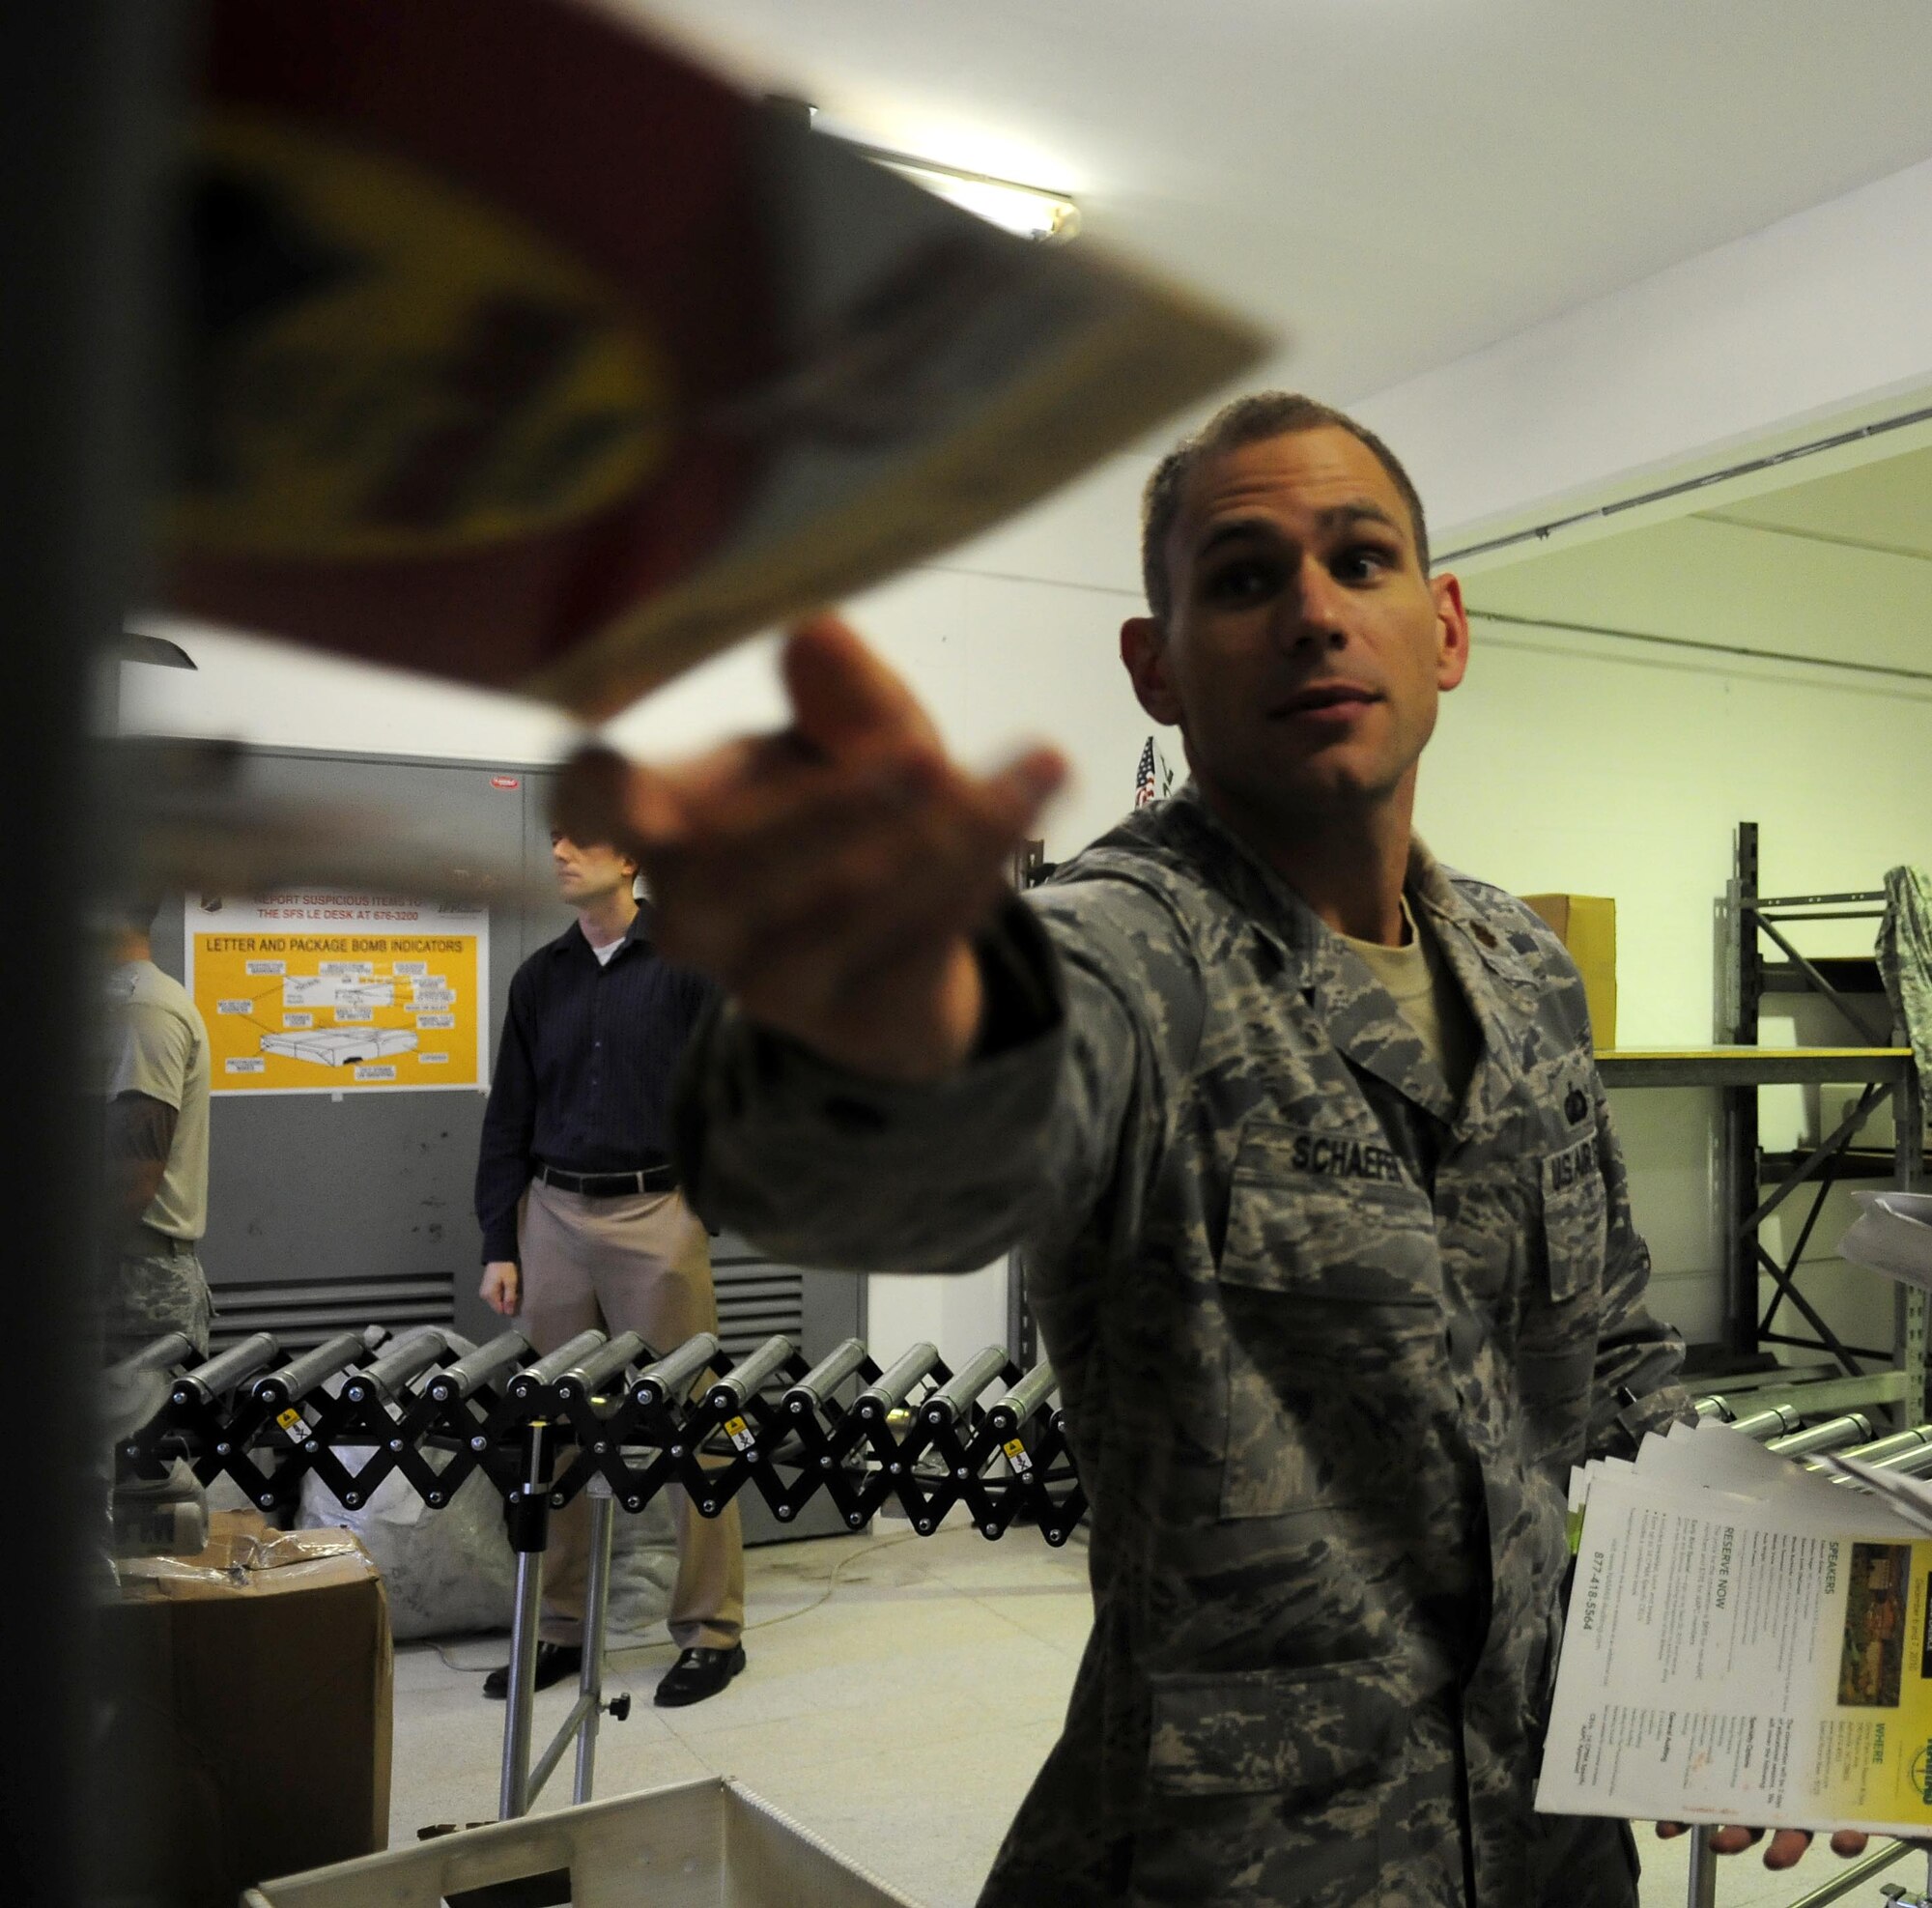 Maj. Joseph Schaefer, 39th Comptroller Squadron commander, helps separate mail Oct. 13, 2010 at Incirlik Air Base, Turkey.  The ODC processes approximately 900 packages each week and is often supported by volunteer assistance.  (U.S. Air Force photo by Senior Airman Ashley Wood/Released)